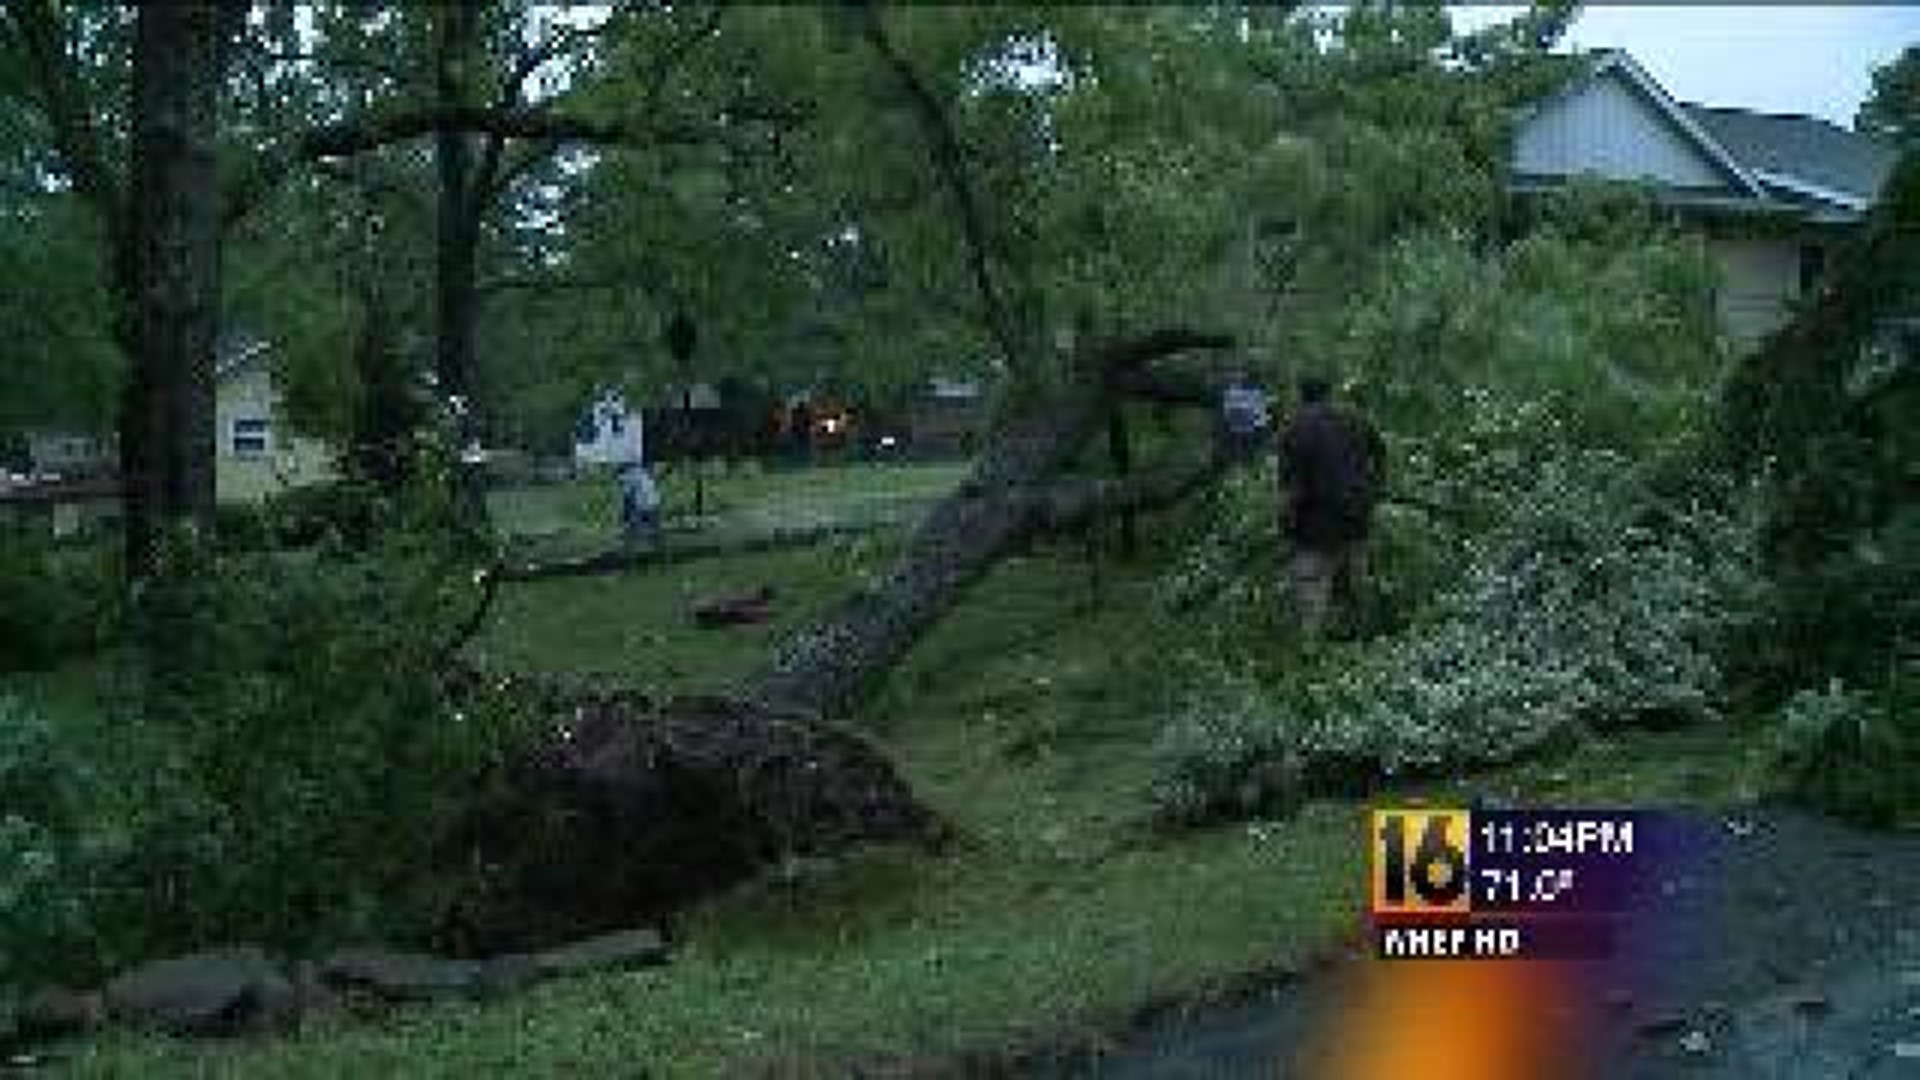 Storm Brings Down Trees in Luzerne County